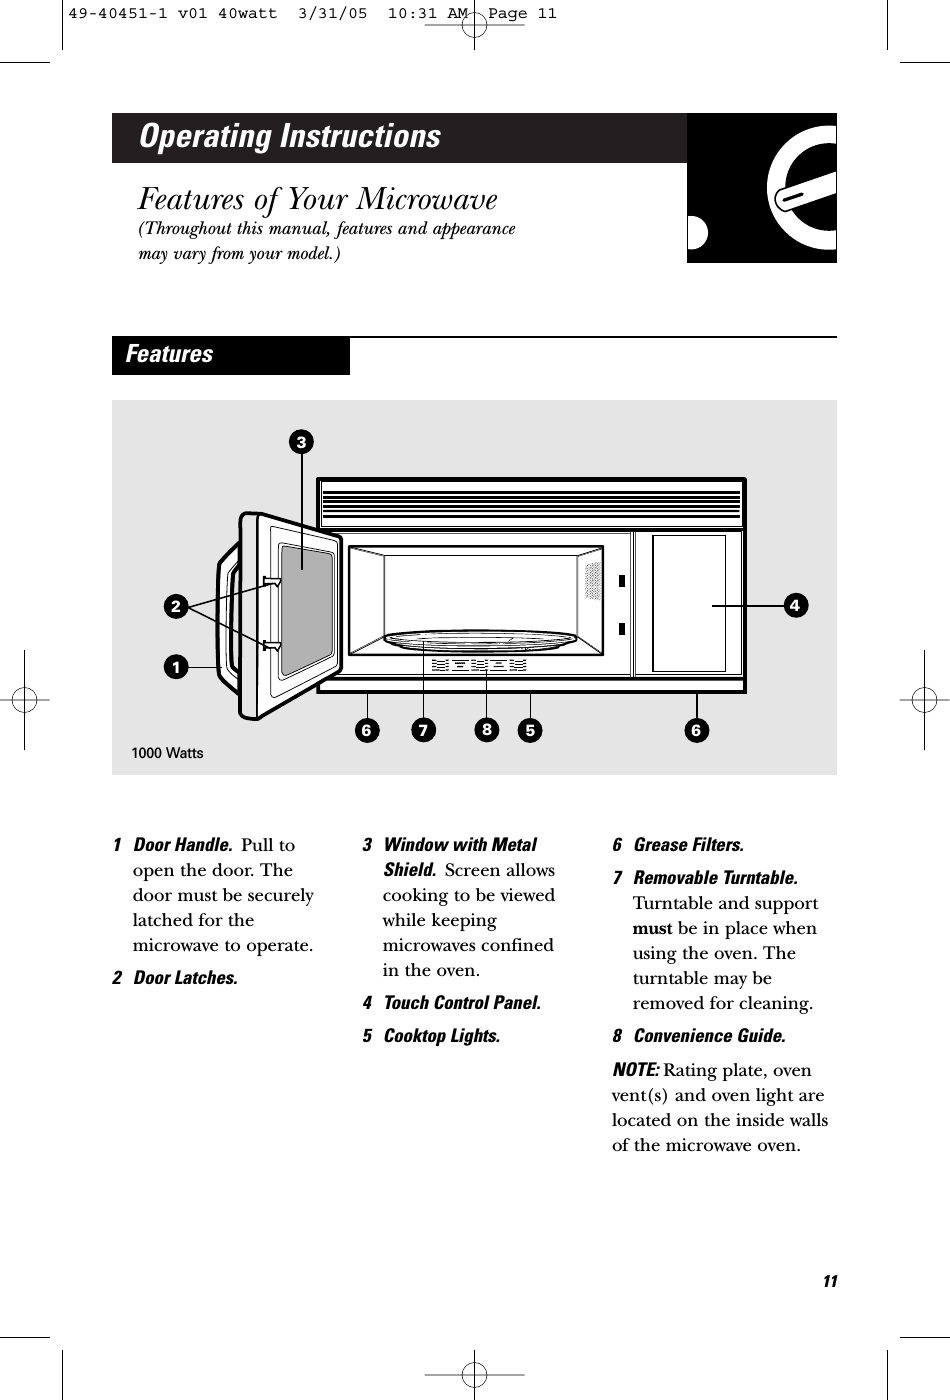 Operating InstructionsFeatures of Your Microwave(Throughout this manual, features and appearancemay vary from your model.)1 Door Handle.  Pull toopen the door. Thedoor must be securelylatched for themicrowave to operate.2 Door Latches.3 Window with MetalShield.  Screen allowscooking to be viewedwhile keepingmicrowaves confined in the oven.4 Touch Control Panel.5 Cooktop Lights.6 Grease Filters.7 Removable Turntable.Turntable and supportmust be in place whenusing the oven. Theturntable may beremoved for cleaning.8 Convenience Guide.NOTE: Rating plate, ovenvent(s) and oven light arelocated on the inside wallsof the microwave oven.Features356871161000 Watts12449-40451-1 v01 40watt  3/31/05  10:31 AM  Page 11